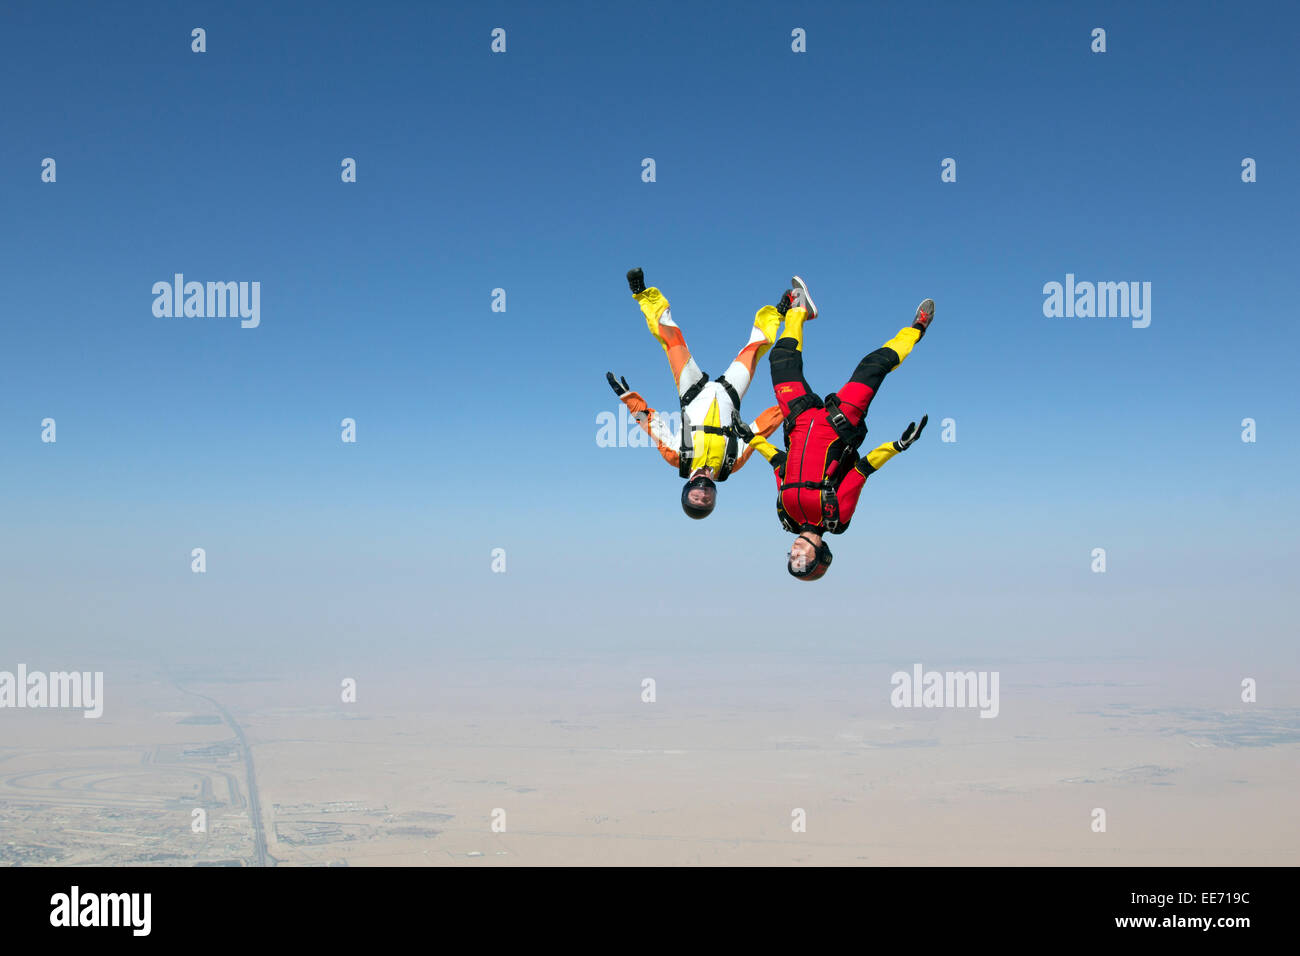 These two skydivers are training the head down flight together. The red jumper is leading with a speed over 120mph in the sky. Stock Photo